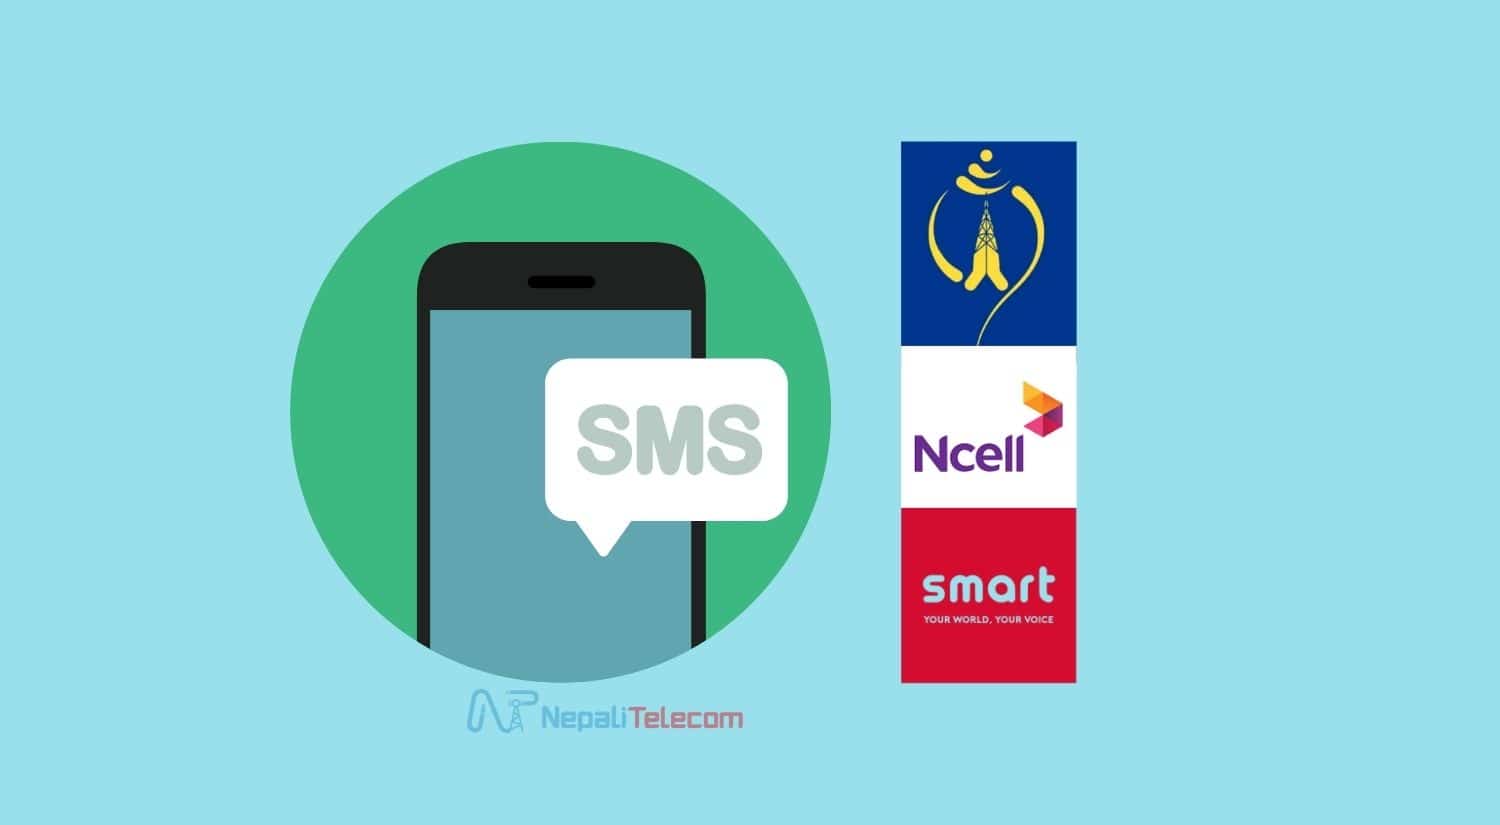 SMS Ntc Ncell Smart Cell